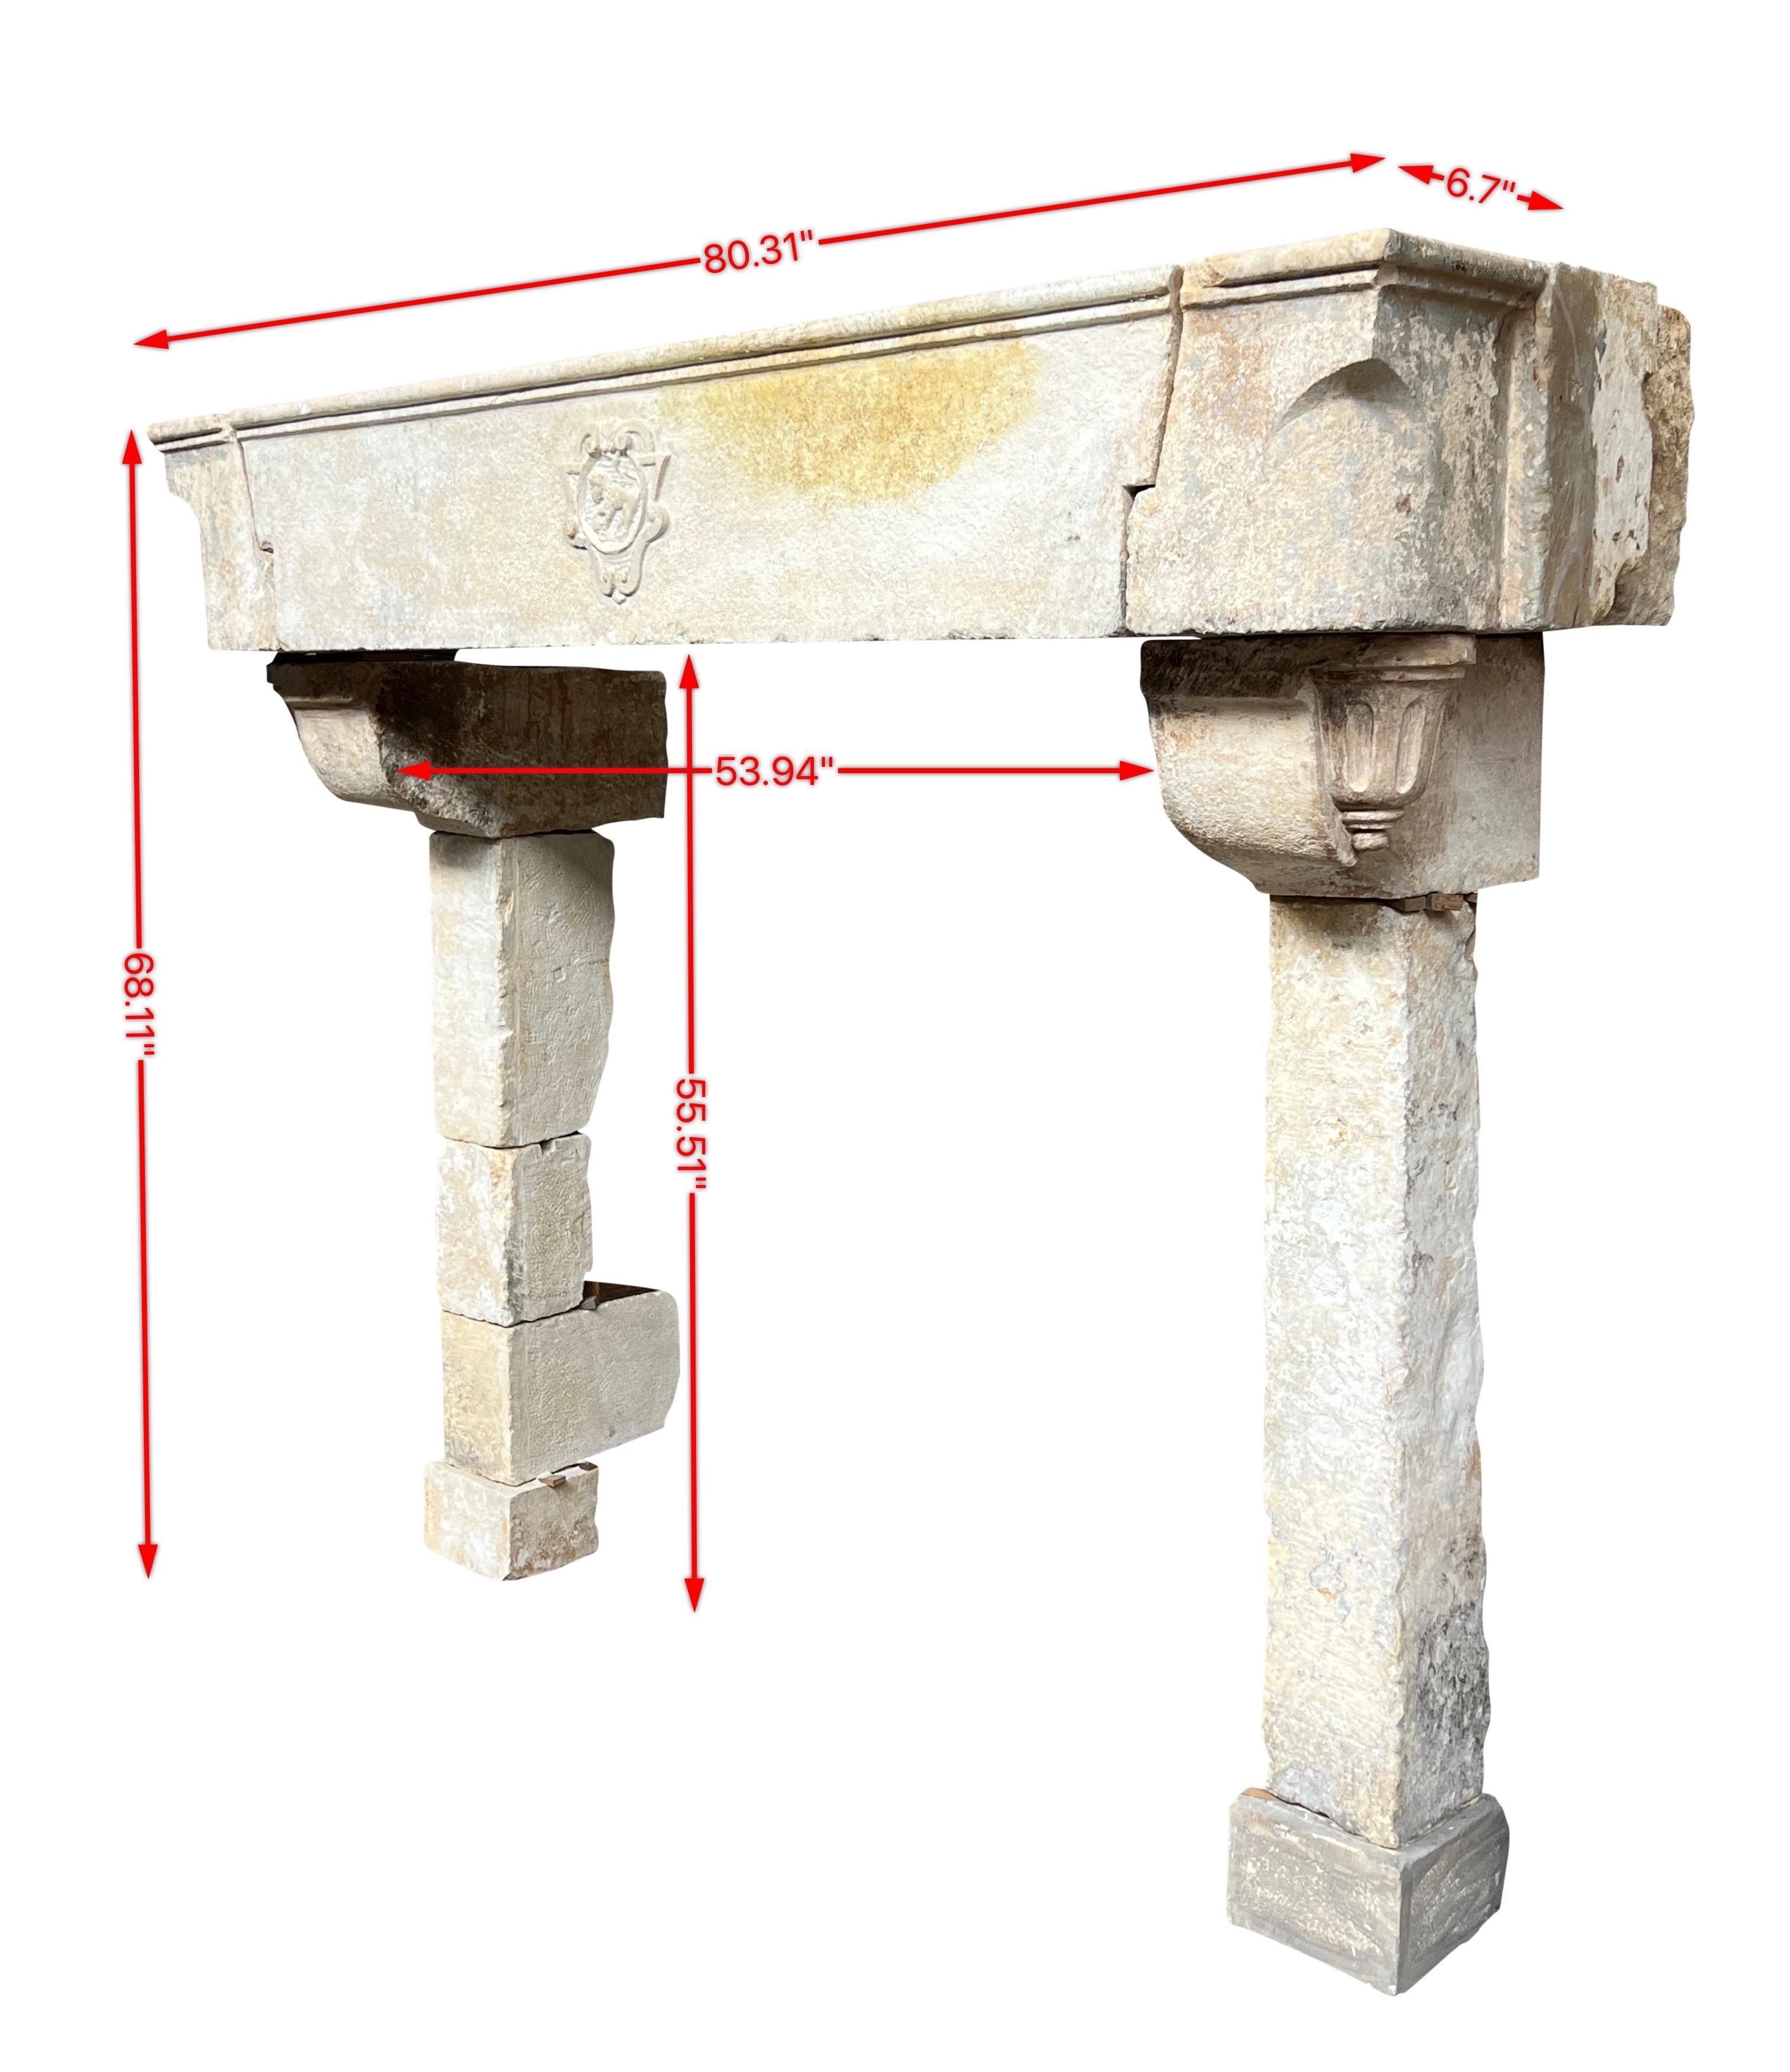 One of a kind French castle fireplace surround in limestone.
This statement mantle piece has rounded corners and fantastic original wear. The central cartouche figures a lion.
Measurements:
204 cm Exterior Width 80,31 Inch
173 cm Exterior Height